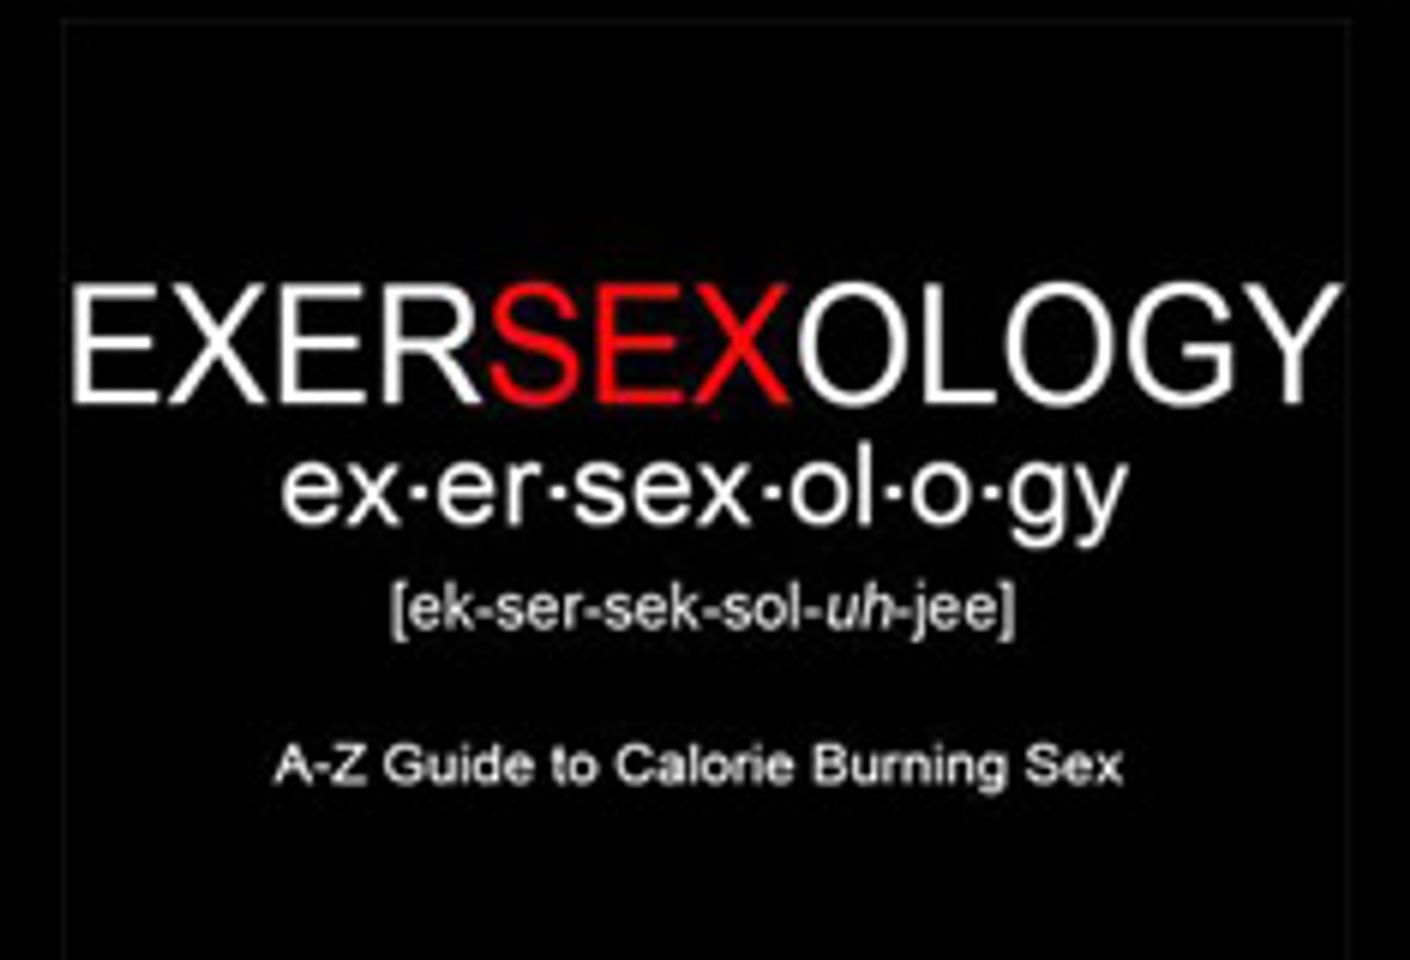 Exersexology Author Conducts Contest For AVN Expo Attendees